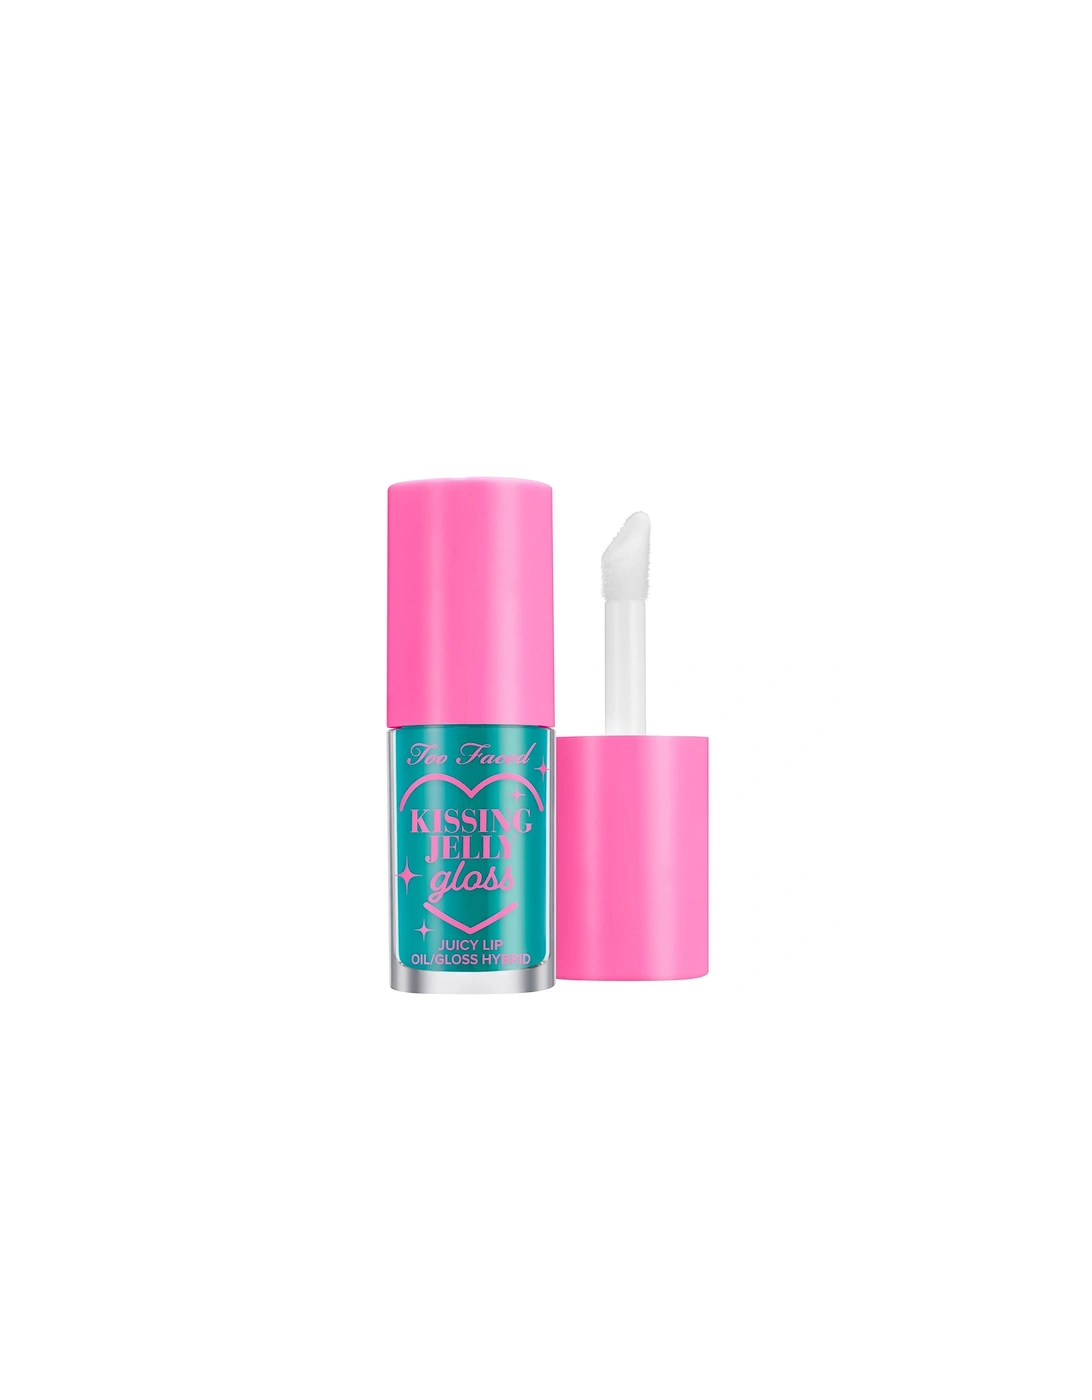 Kissing Jelly Lip Oil Gloss - Sweet Cotton Candy, 2 of 1